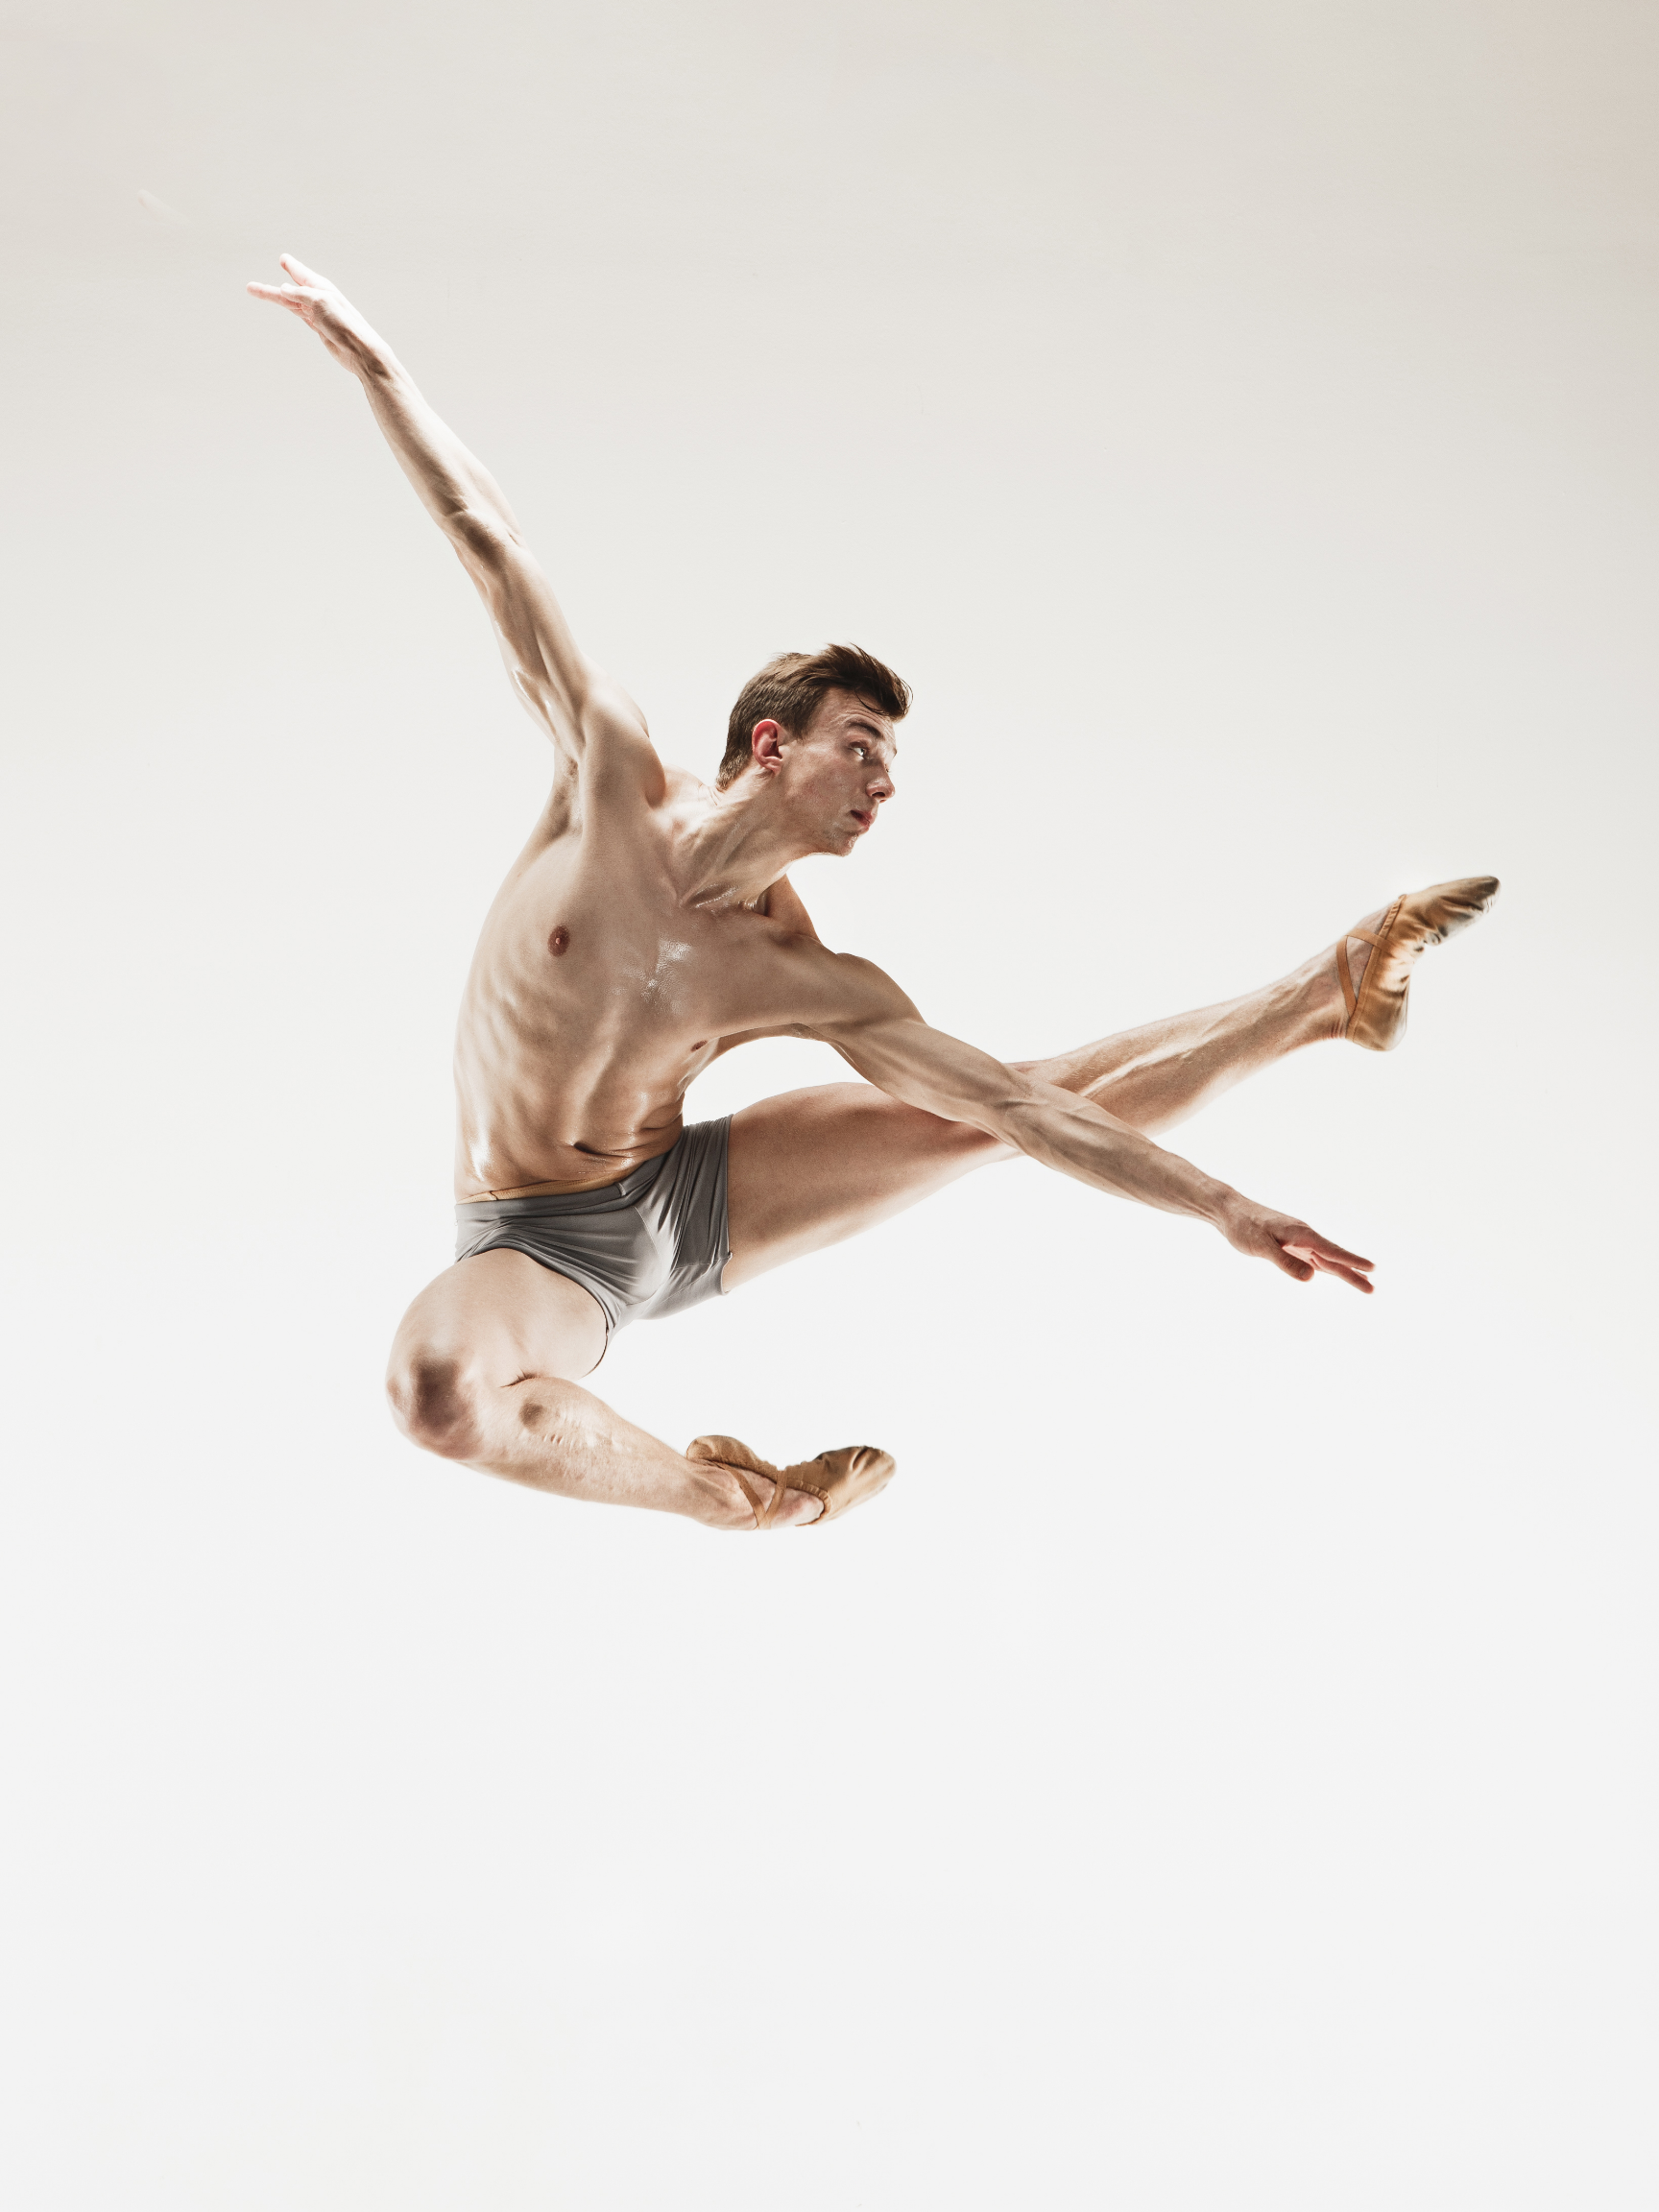 Strong male dancer leaping